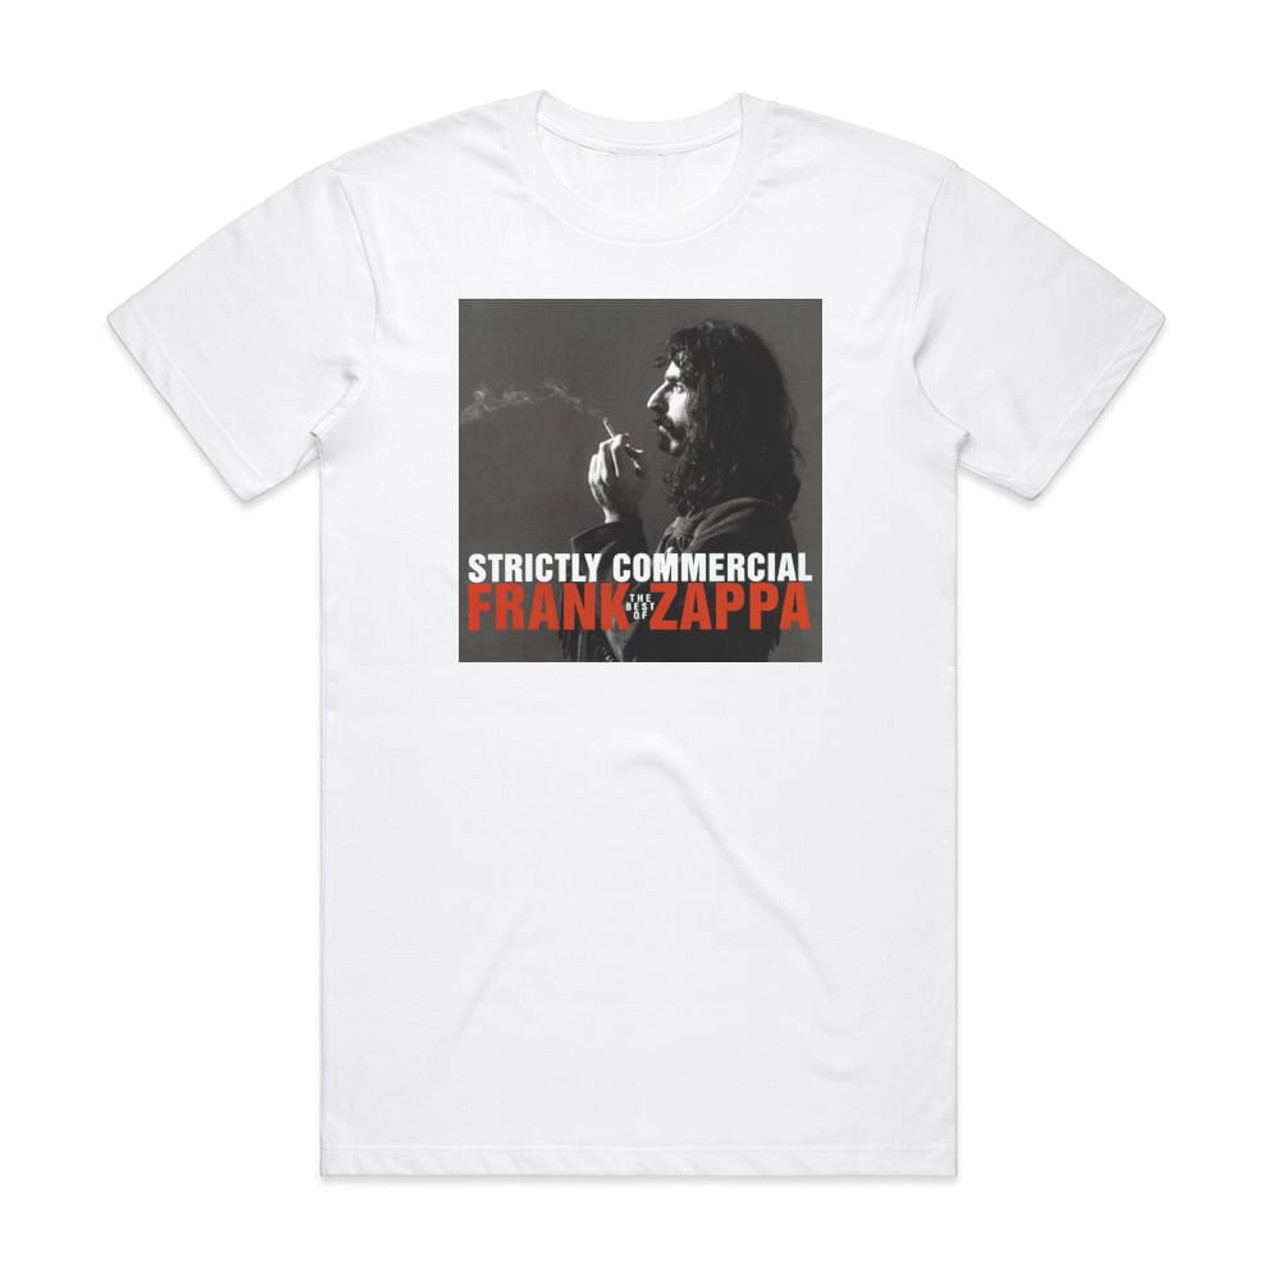 Frank Zappa Strictly The Best Of Frank 1 Album Cover T- Shirt White